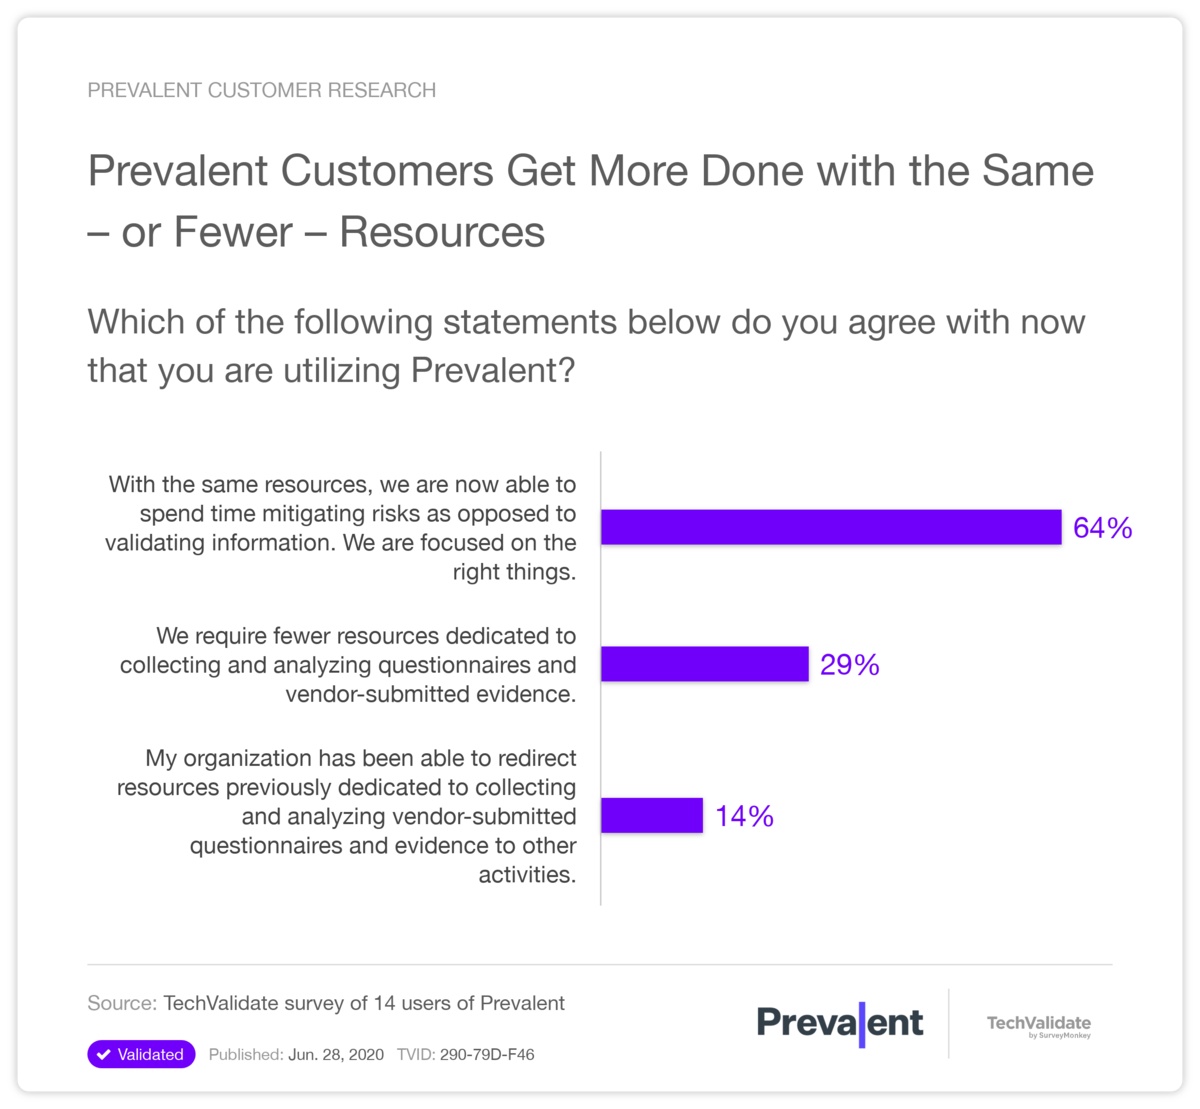 Prevalent Customers Get More Done with the Same-or Fewer-Resources